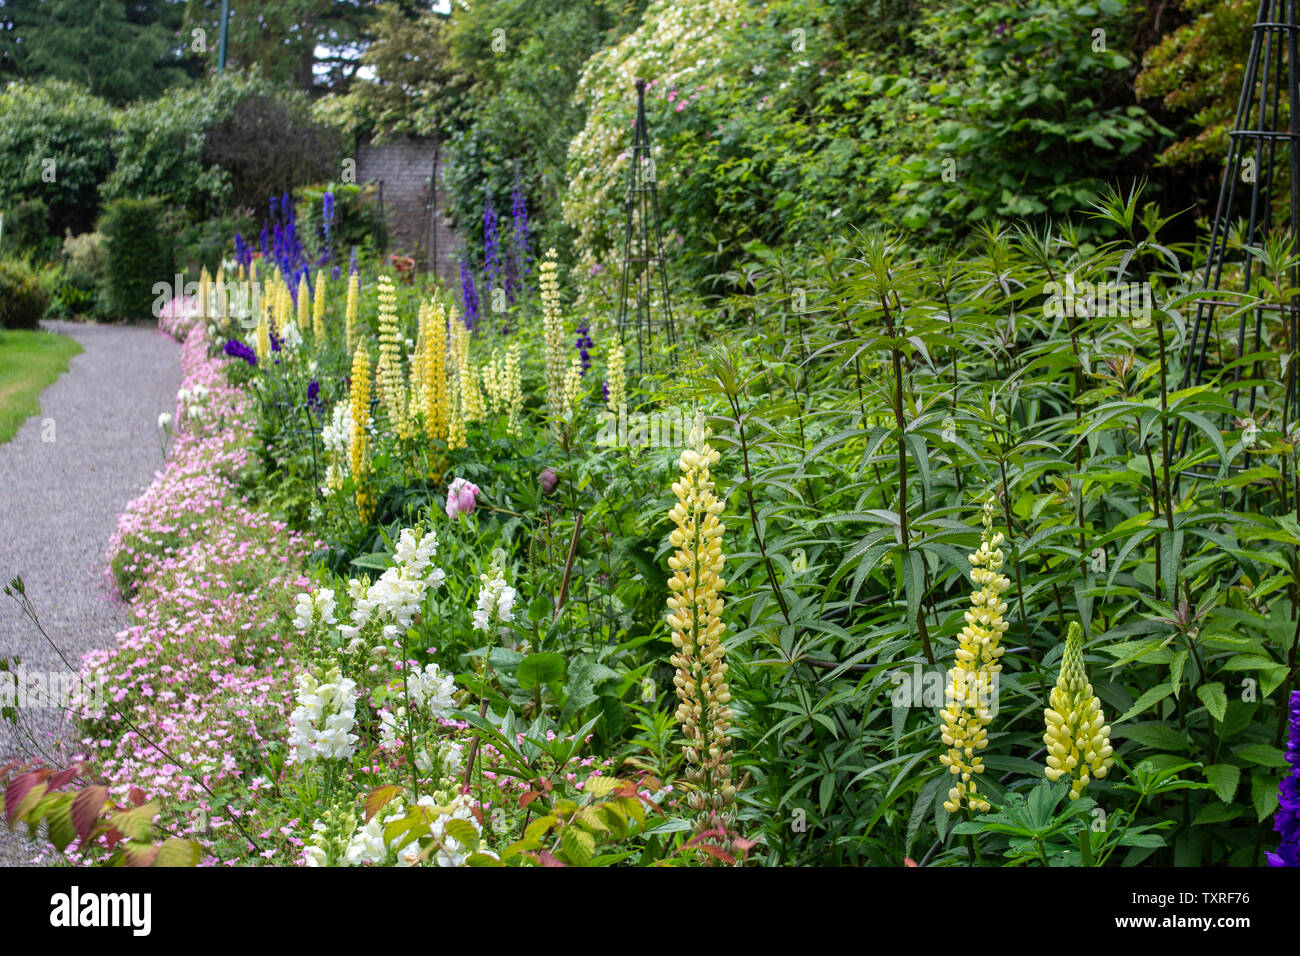 Herbaceous border growing along a gravel path, with a wide variety of colourful plants. Stock Photo